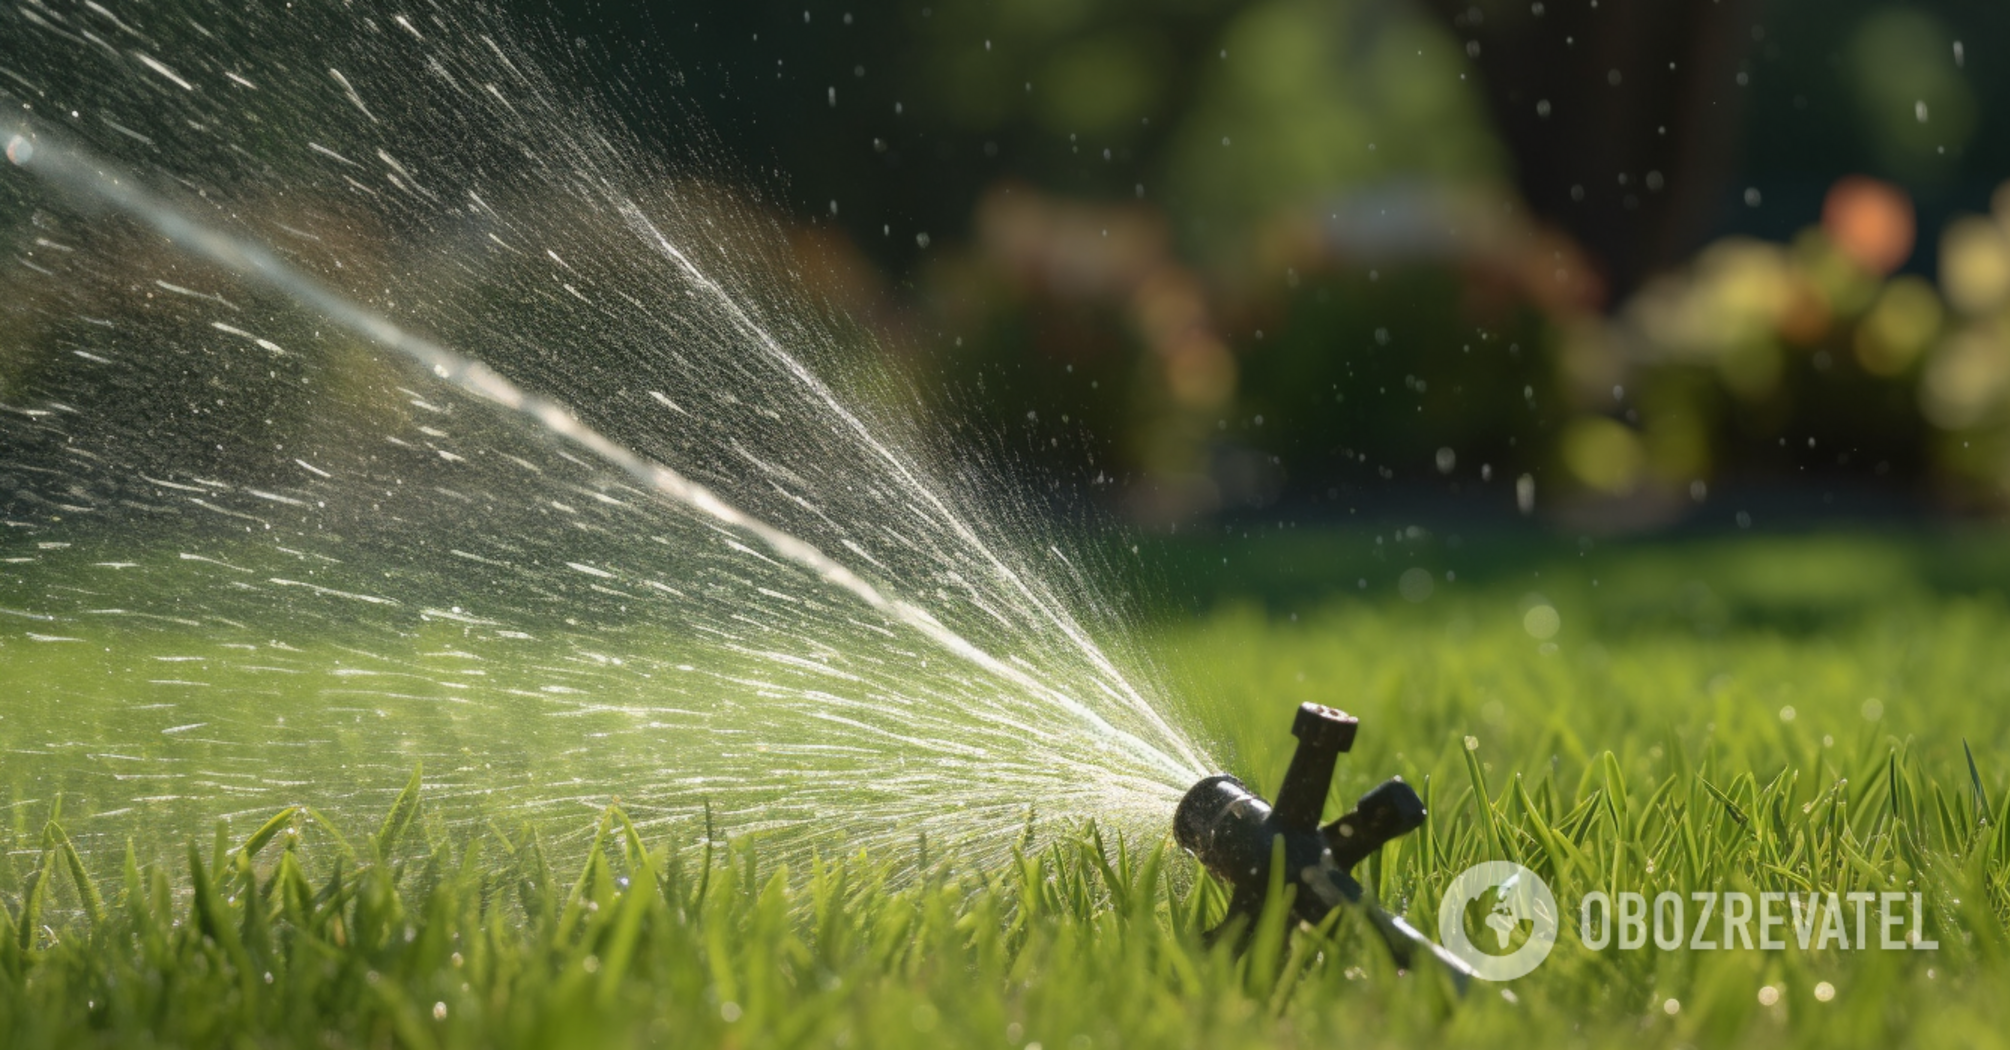 Not at night: when to water your lawn during hot days